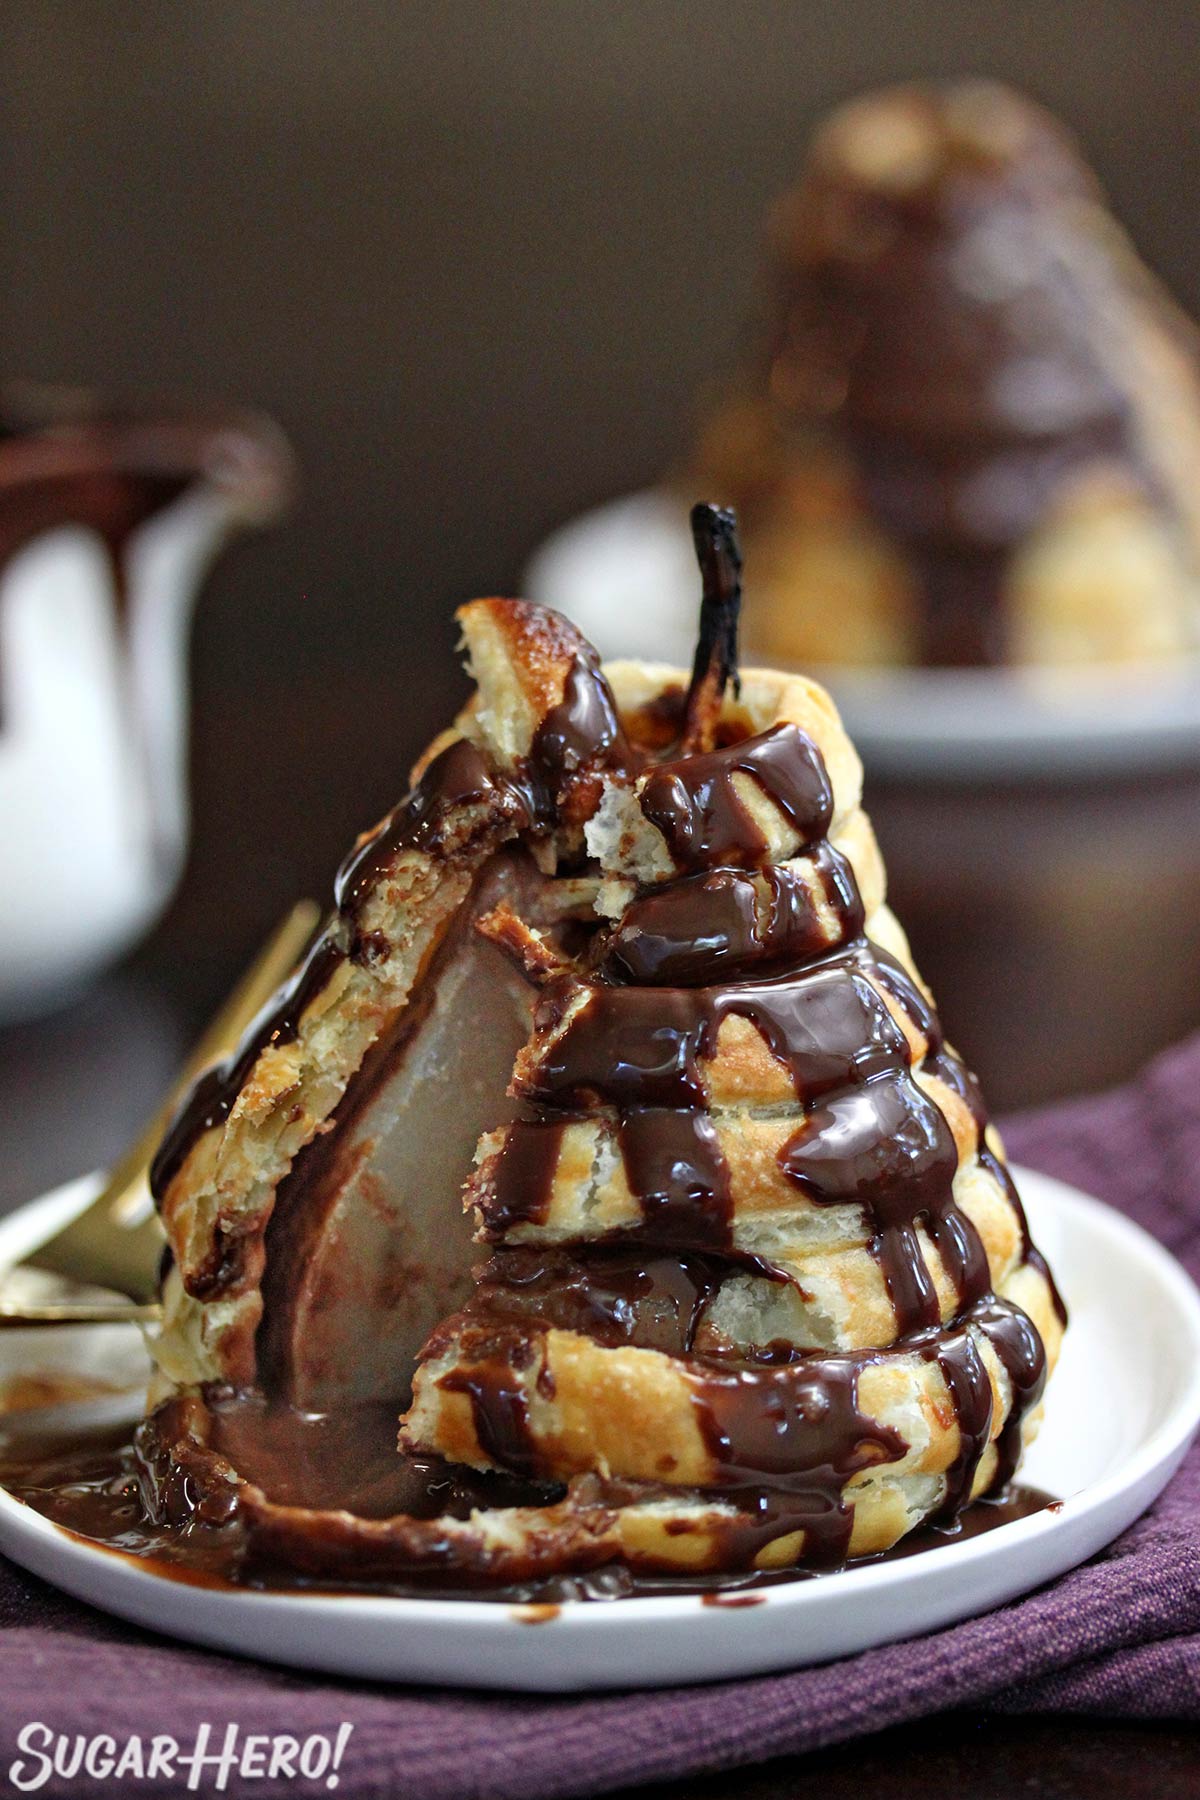 Puff Pastry-Wrapped Pears with Chocolate Espresso Sauce | From SugarHero.com